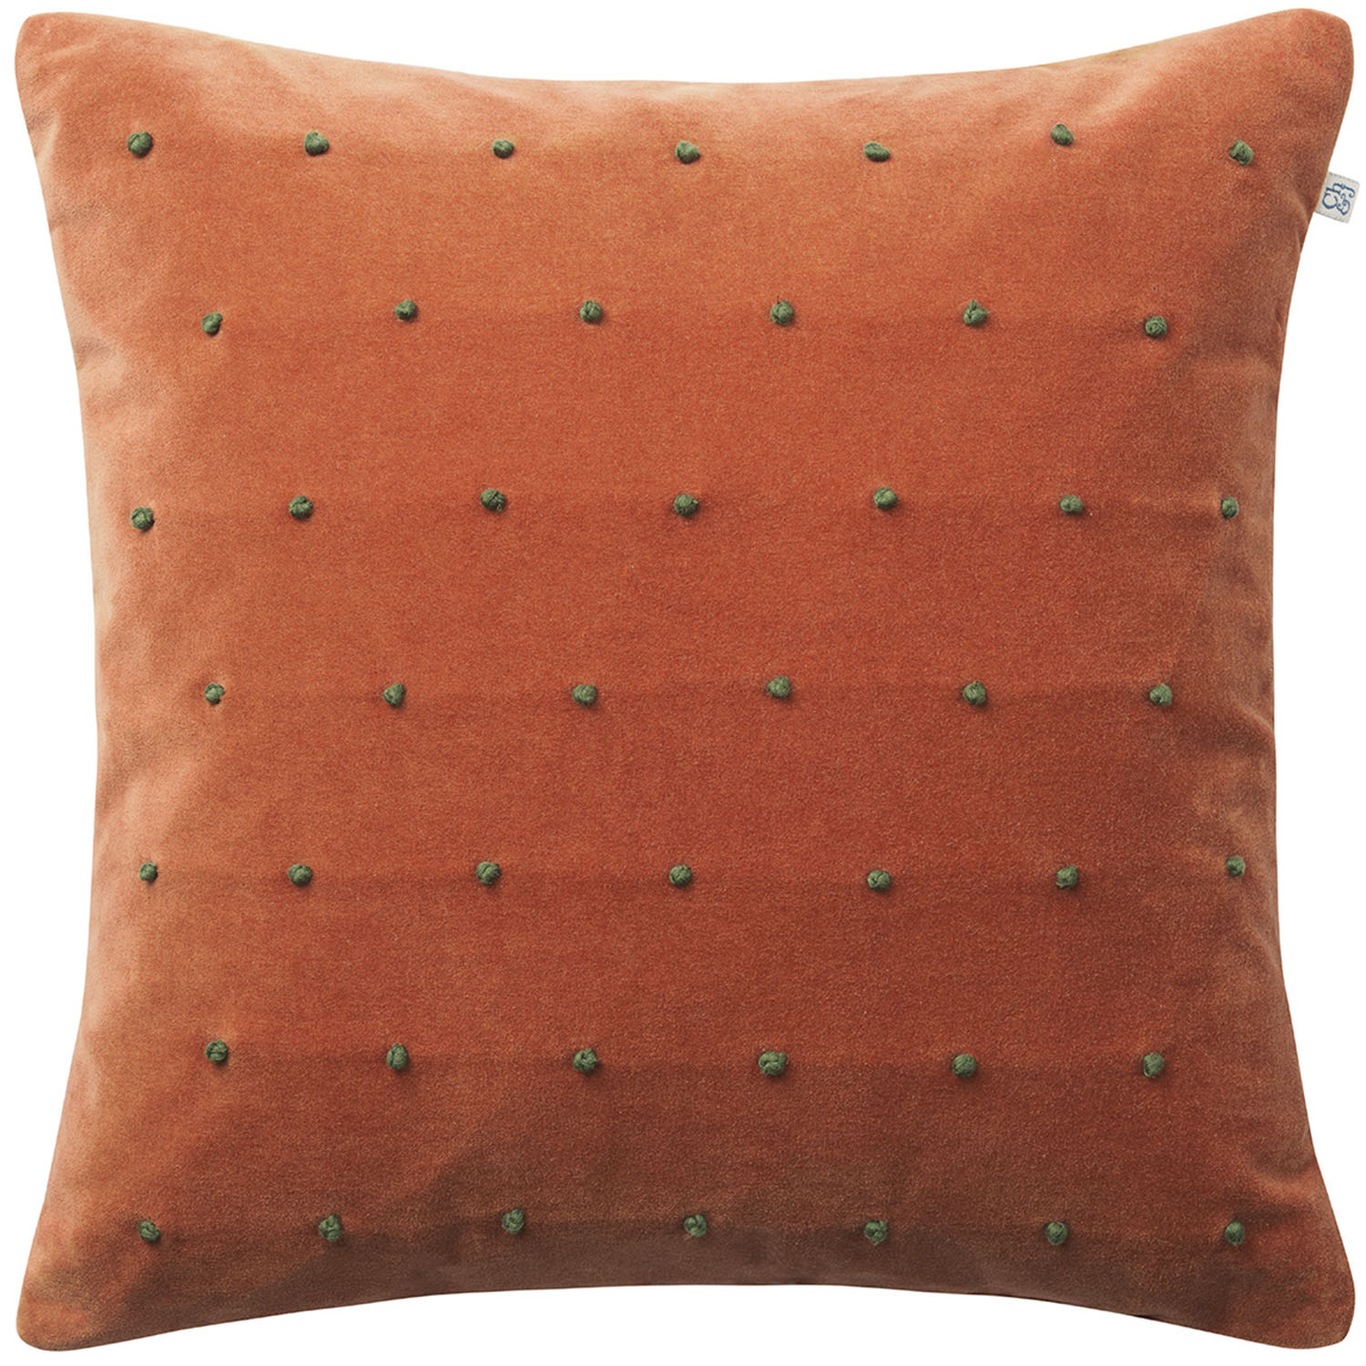 Roma Cushion Cover Terracotta/Forest Green, 50x50 cm